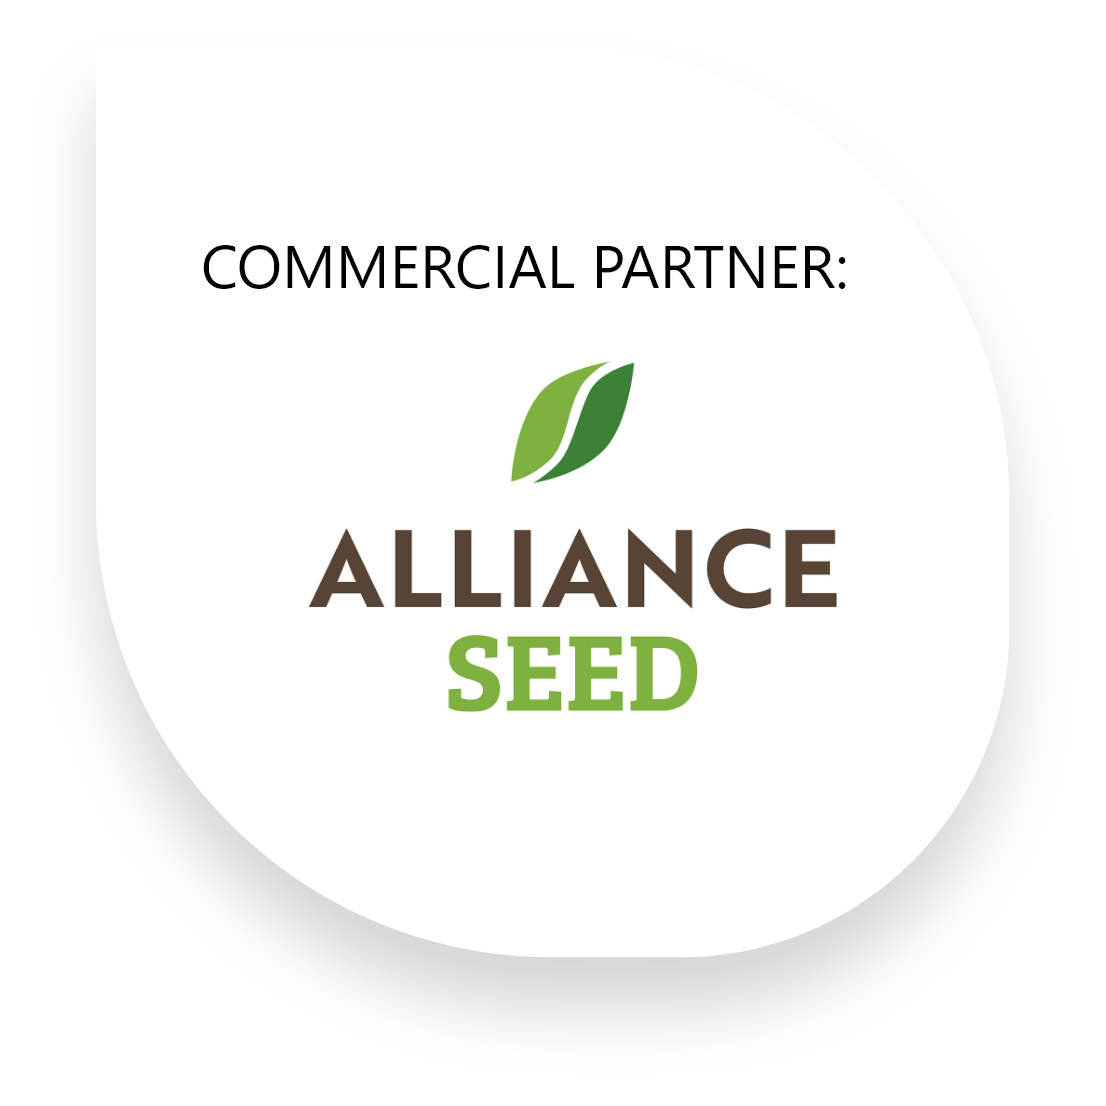 Commercial partner: Alliance Seed